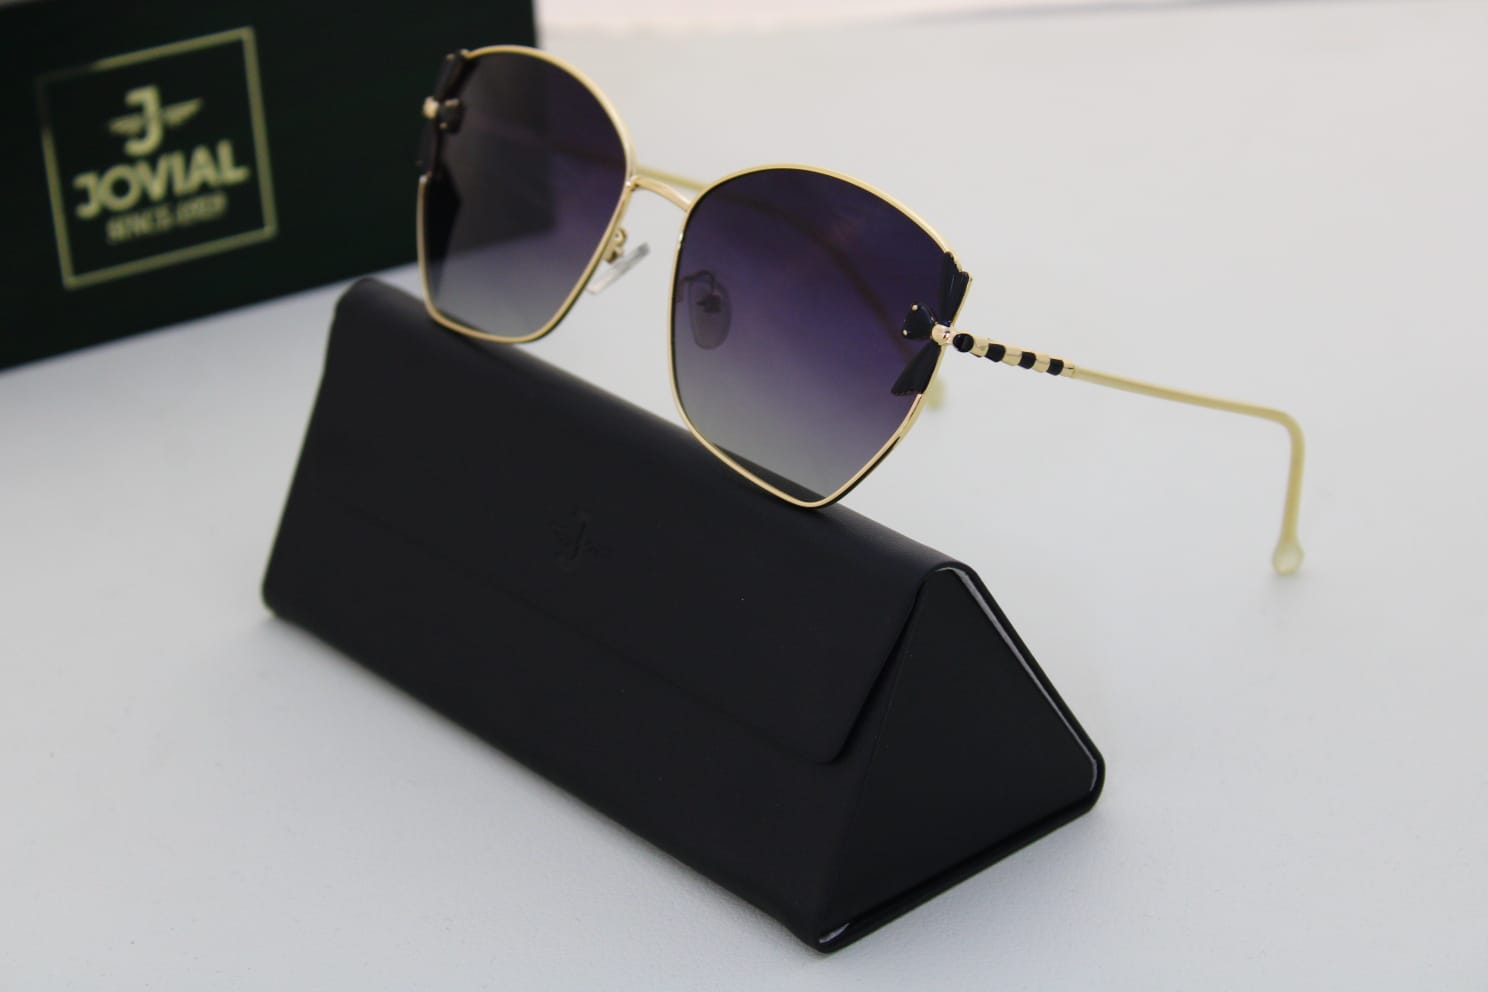 Elevate Your Style with JOVIAL 58352 C1 Women's Sunglasses - Exclusive at Takreem - #shoElevate Your Style with JOVIAL 58352 C1 Women's Sunglasses - Exclusive at Takreemp_name#Elevate Your Style with JOVIAL 58352 C1 Women's Sunglasses - Exclusive at TakreemSunglassesJOVIALTakreem.jo58352 C1BlackStainless SteelWomenElevate Your Style with JOVIAL 58352 C1 Women's Sunglasses - Exclusive at Takreem - Takreem.jo